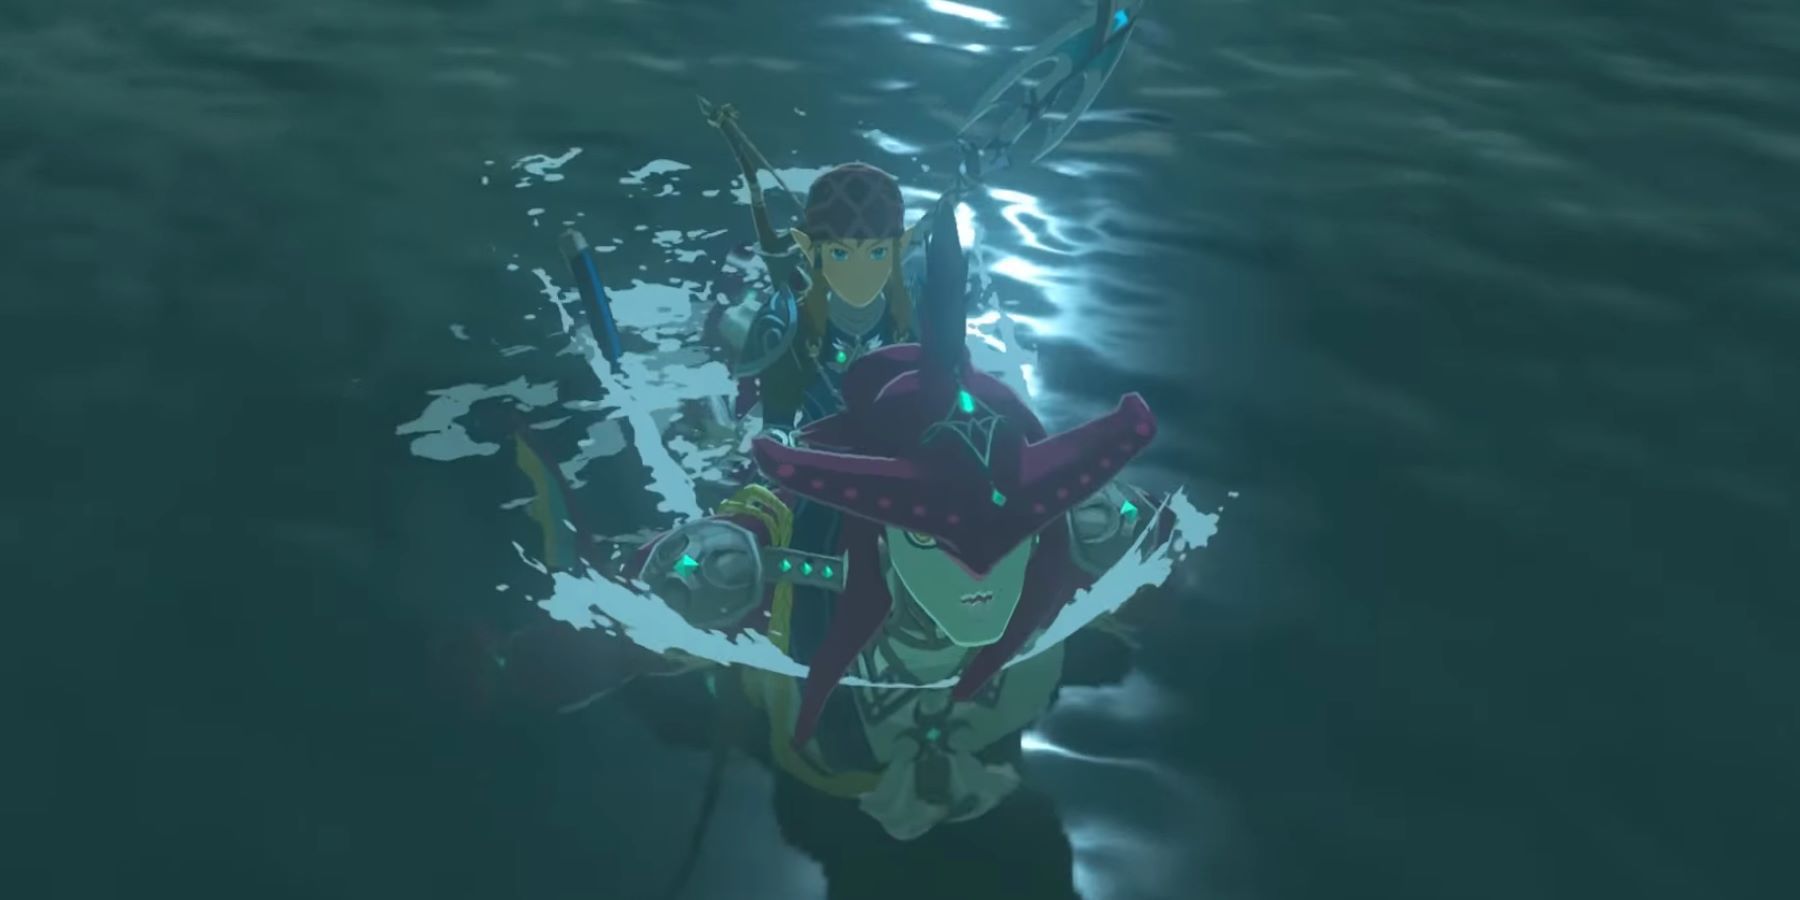 Link riding on Sidon's back to access Divine Beast Vah Ruta in The Legend of Zelda: Breath of the Wild